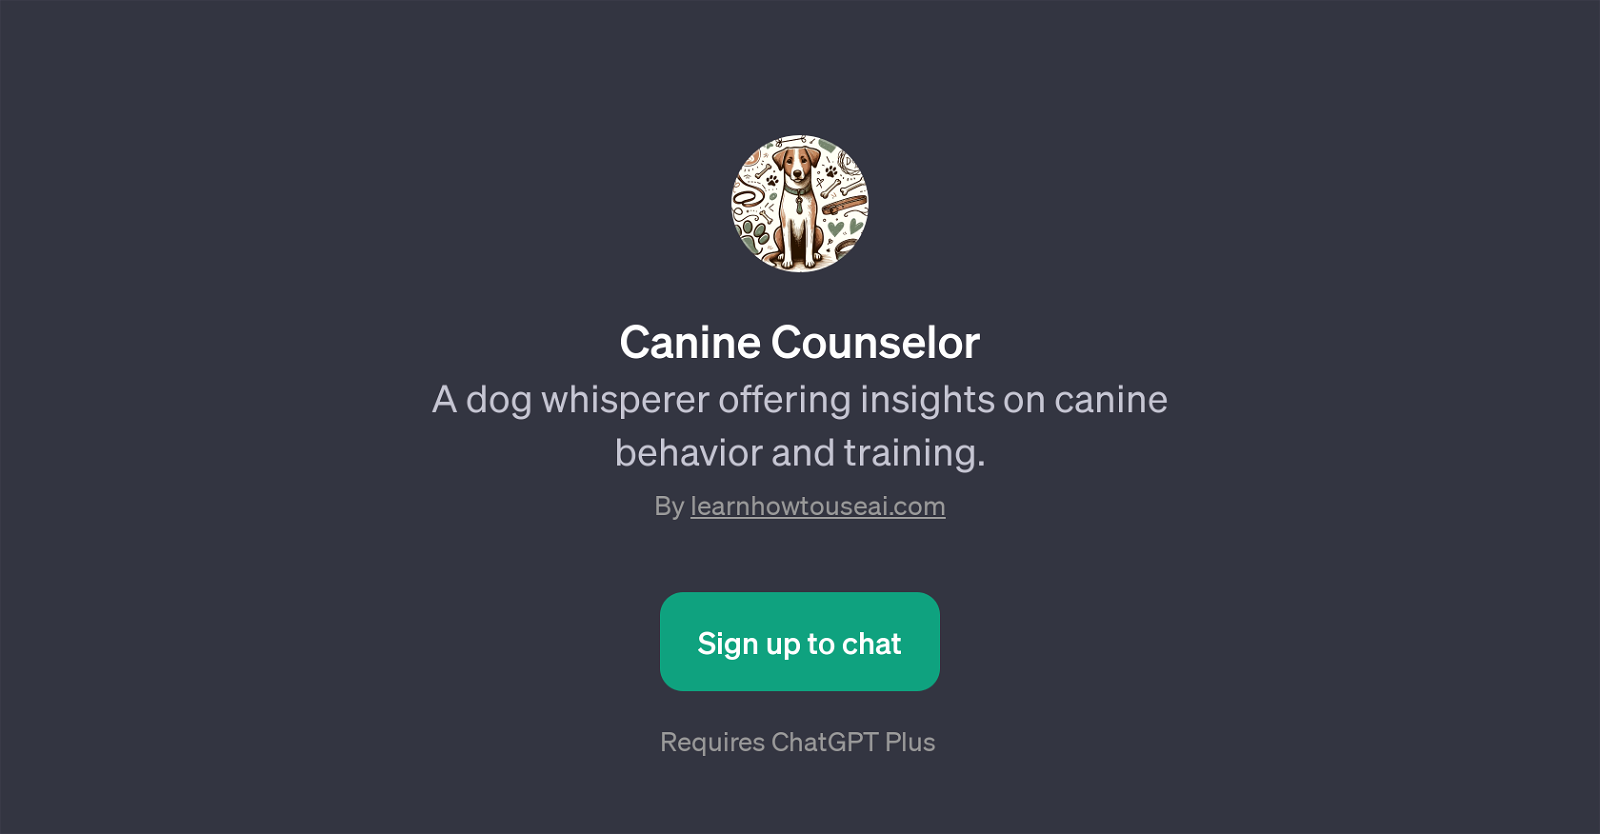 Canine Counselor website